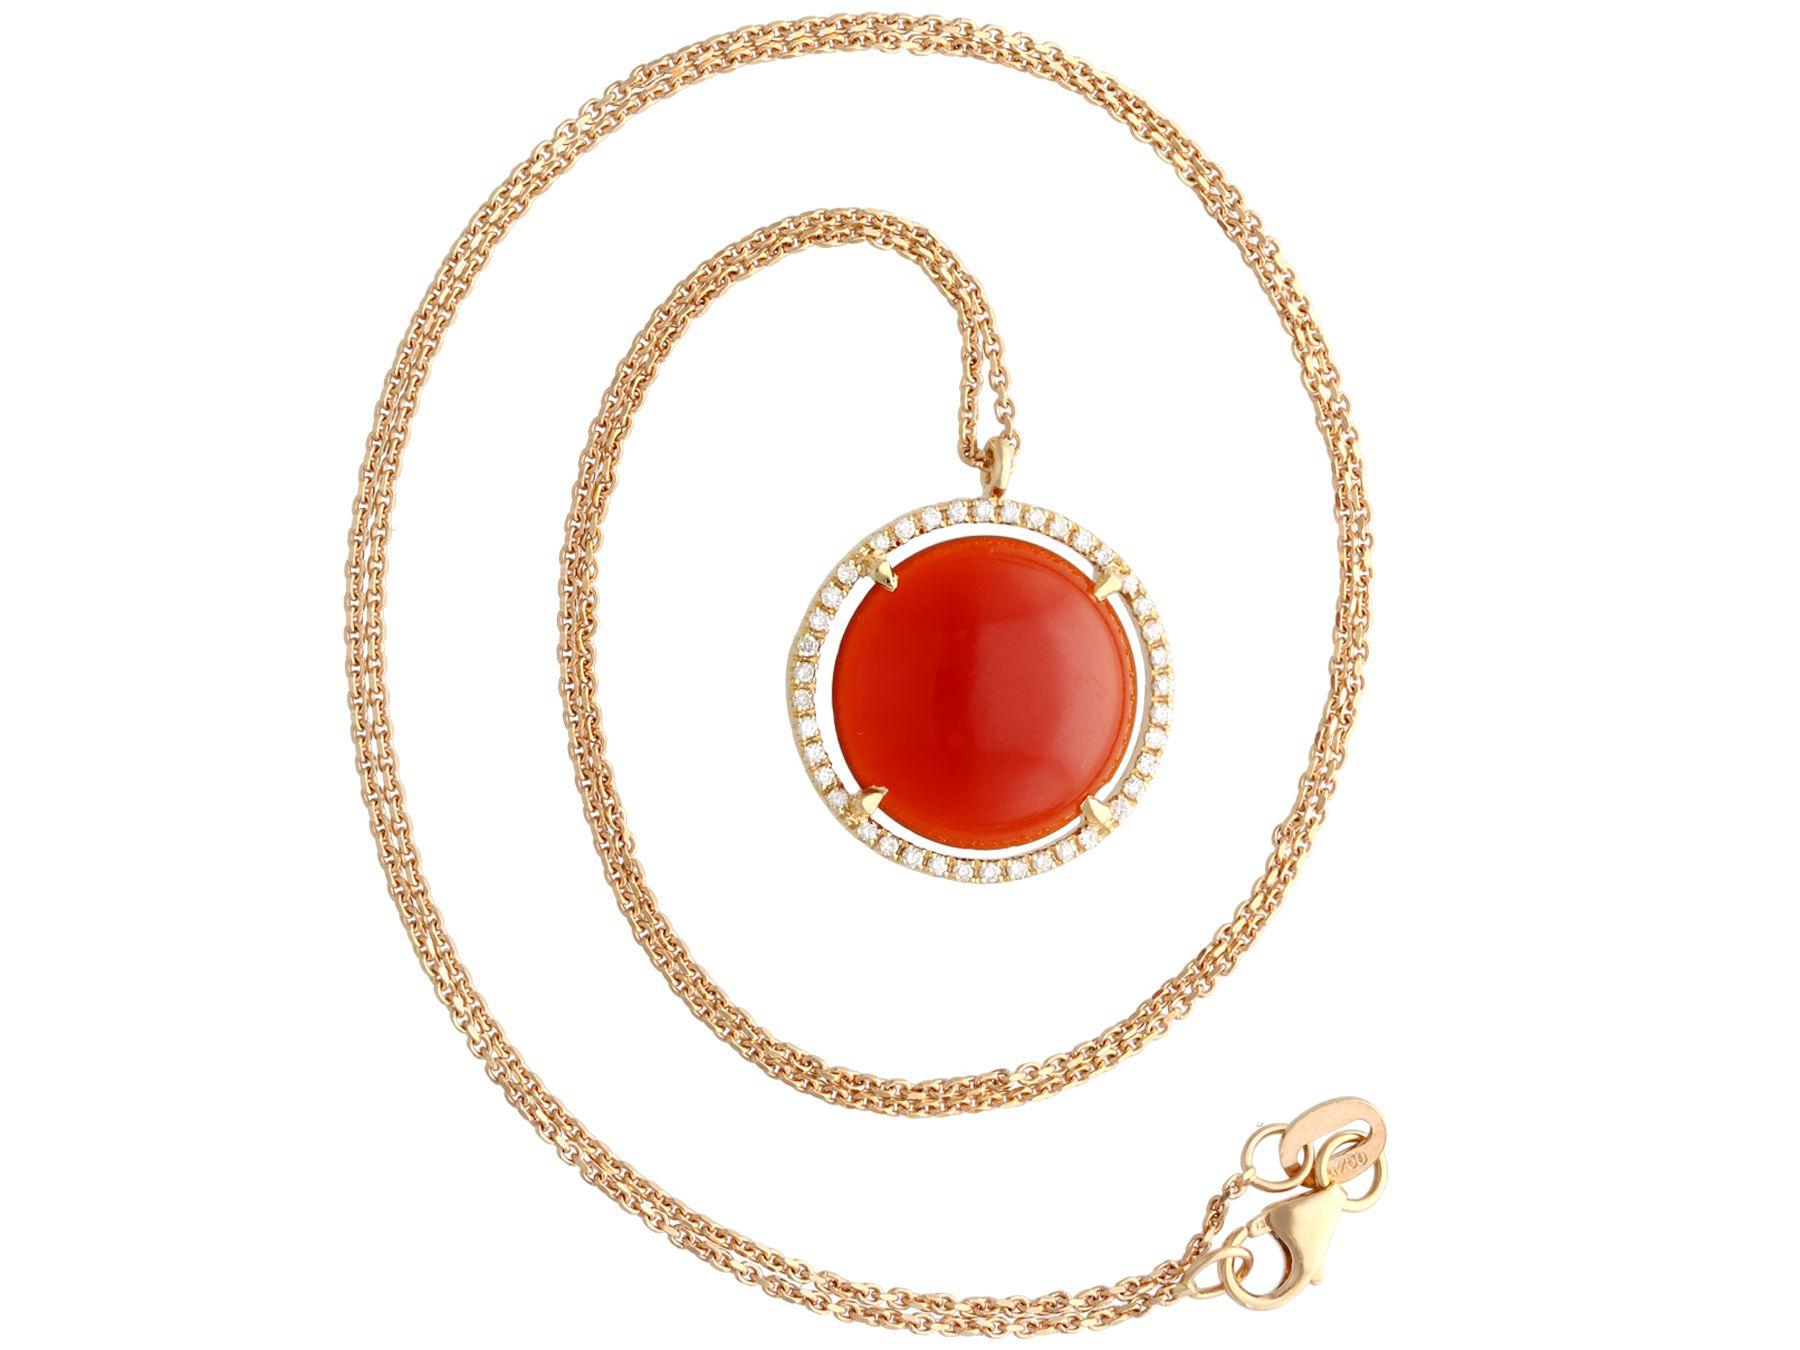 A fine and impressive vintage Italian 4.62 Carat carnelian and 0.25 Carat diamond, 18 karat rose gold pendant; part of our diverse vintage jewelry and estate jewelry collections.

This fine and impressive vintage pendant has been crafted in 18k rose